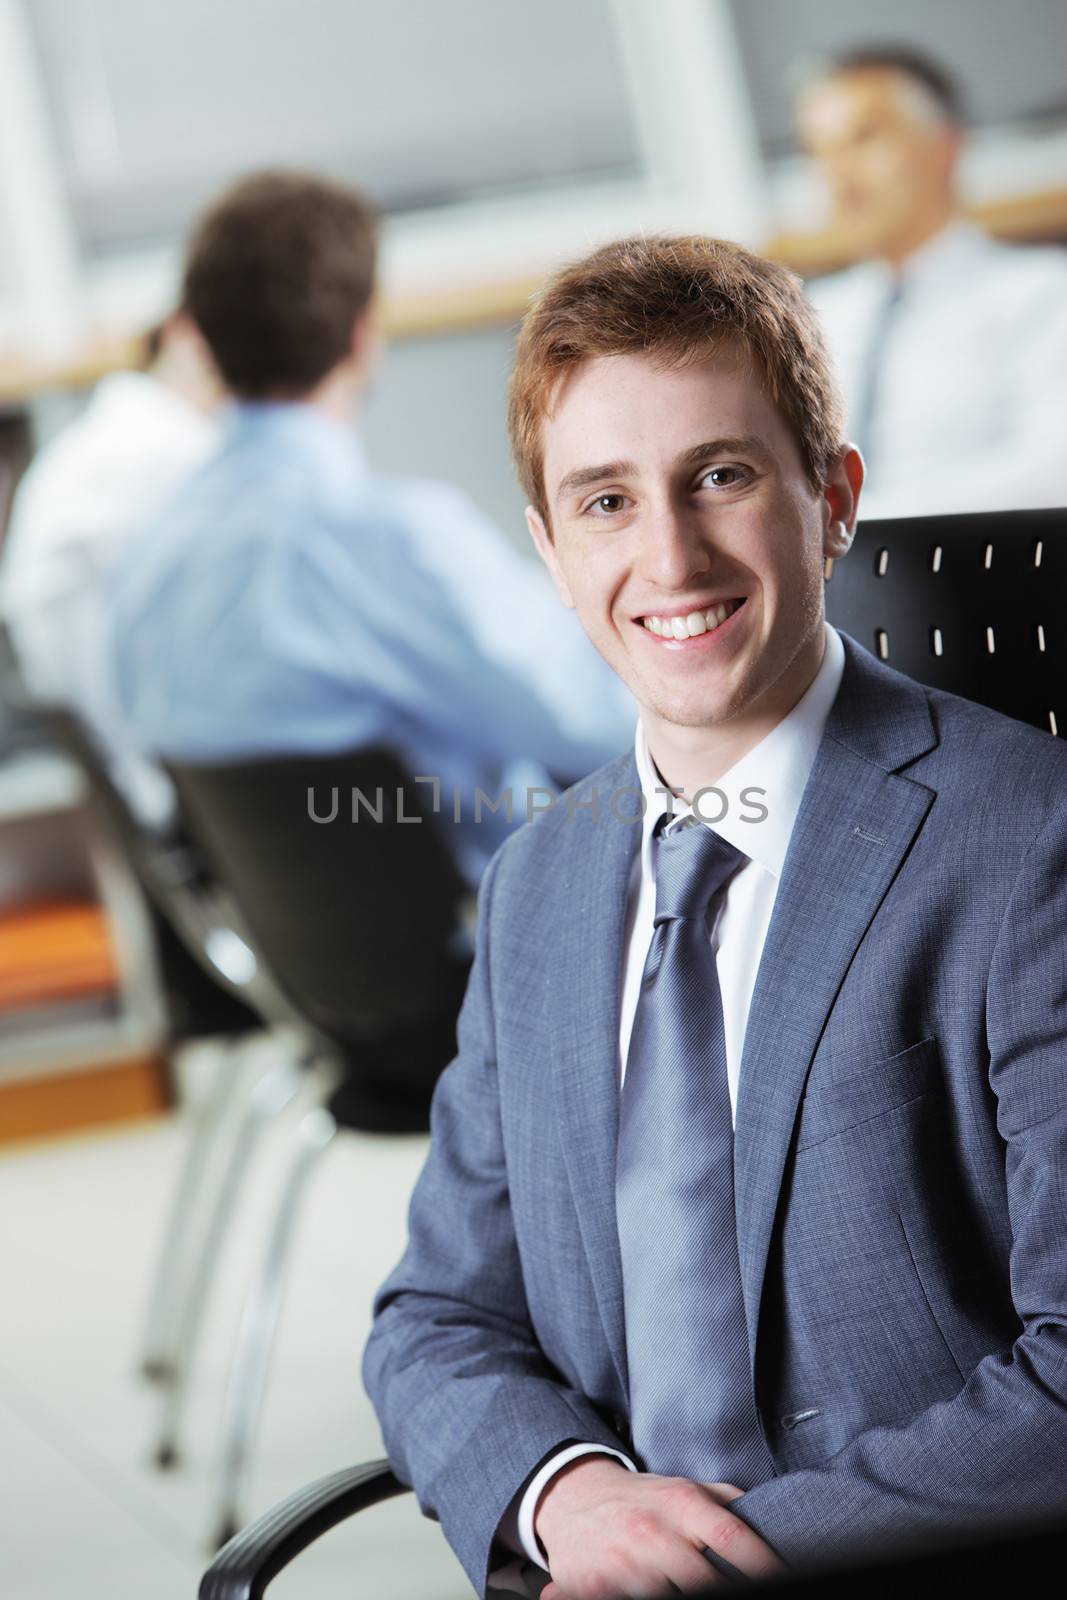 Young businessman with colleagues in the background